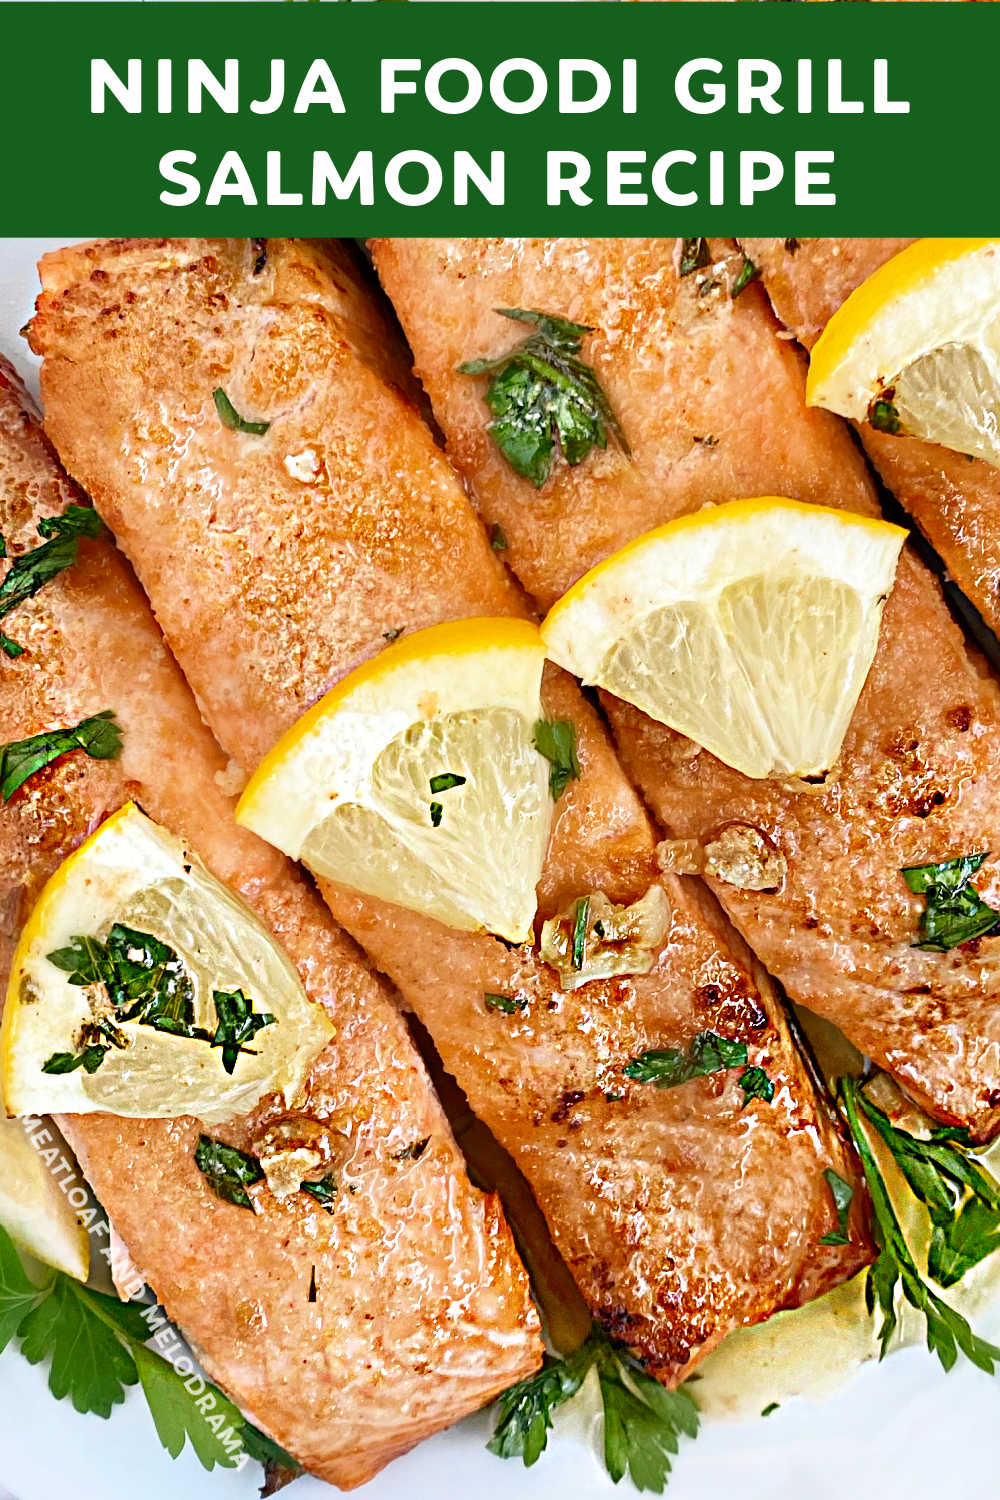 This Easy Ninja Foodi Grill Salmon Recipe with a simple lemon garlic butter sauce takes minutes to cook on the indoor grill. Enjoy this delicious, healthy dinner all year long. It's low carb and Keto friendly, too! Ninja Foodi grill recipes via @meamel